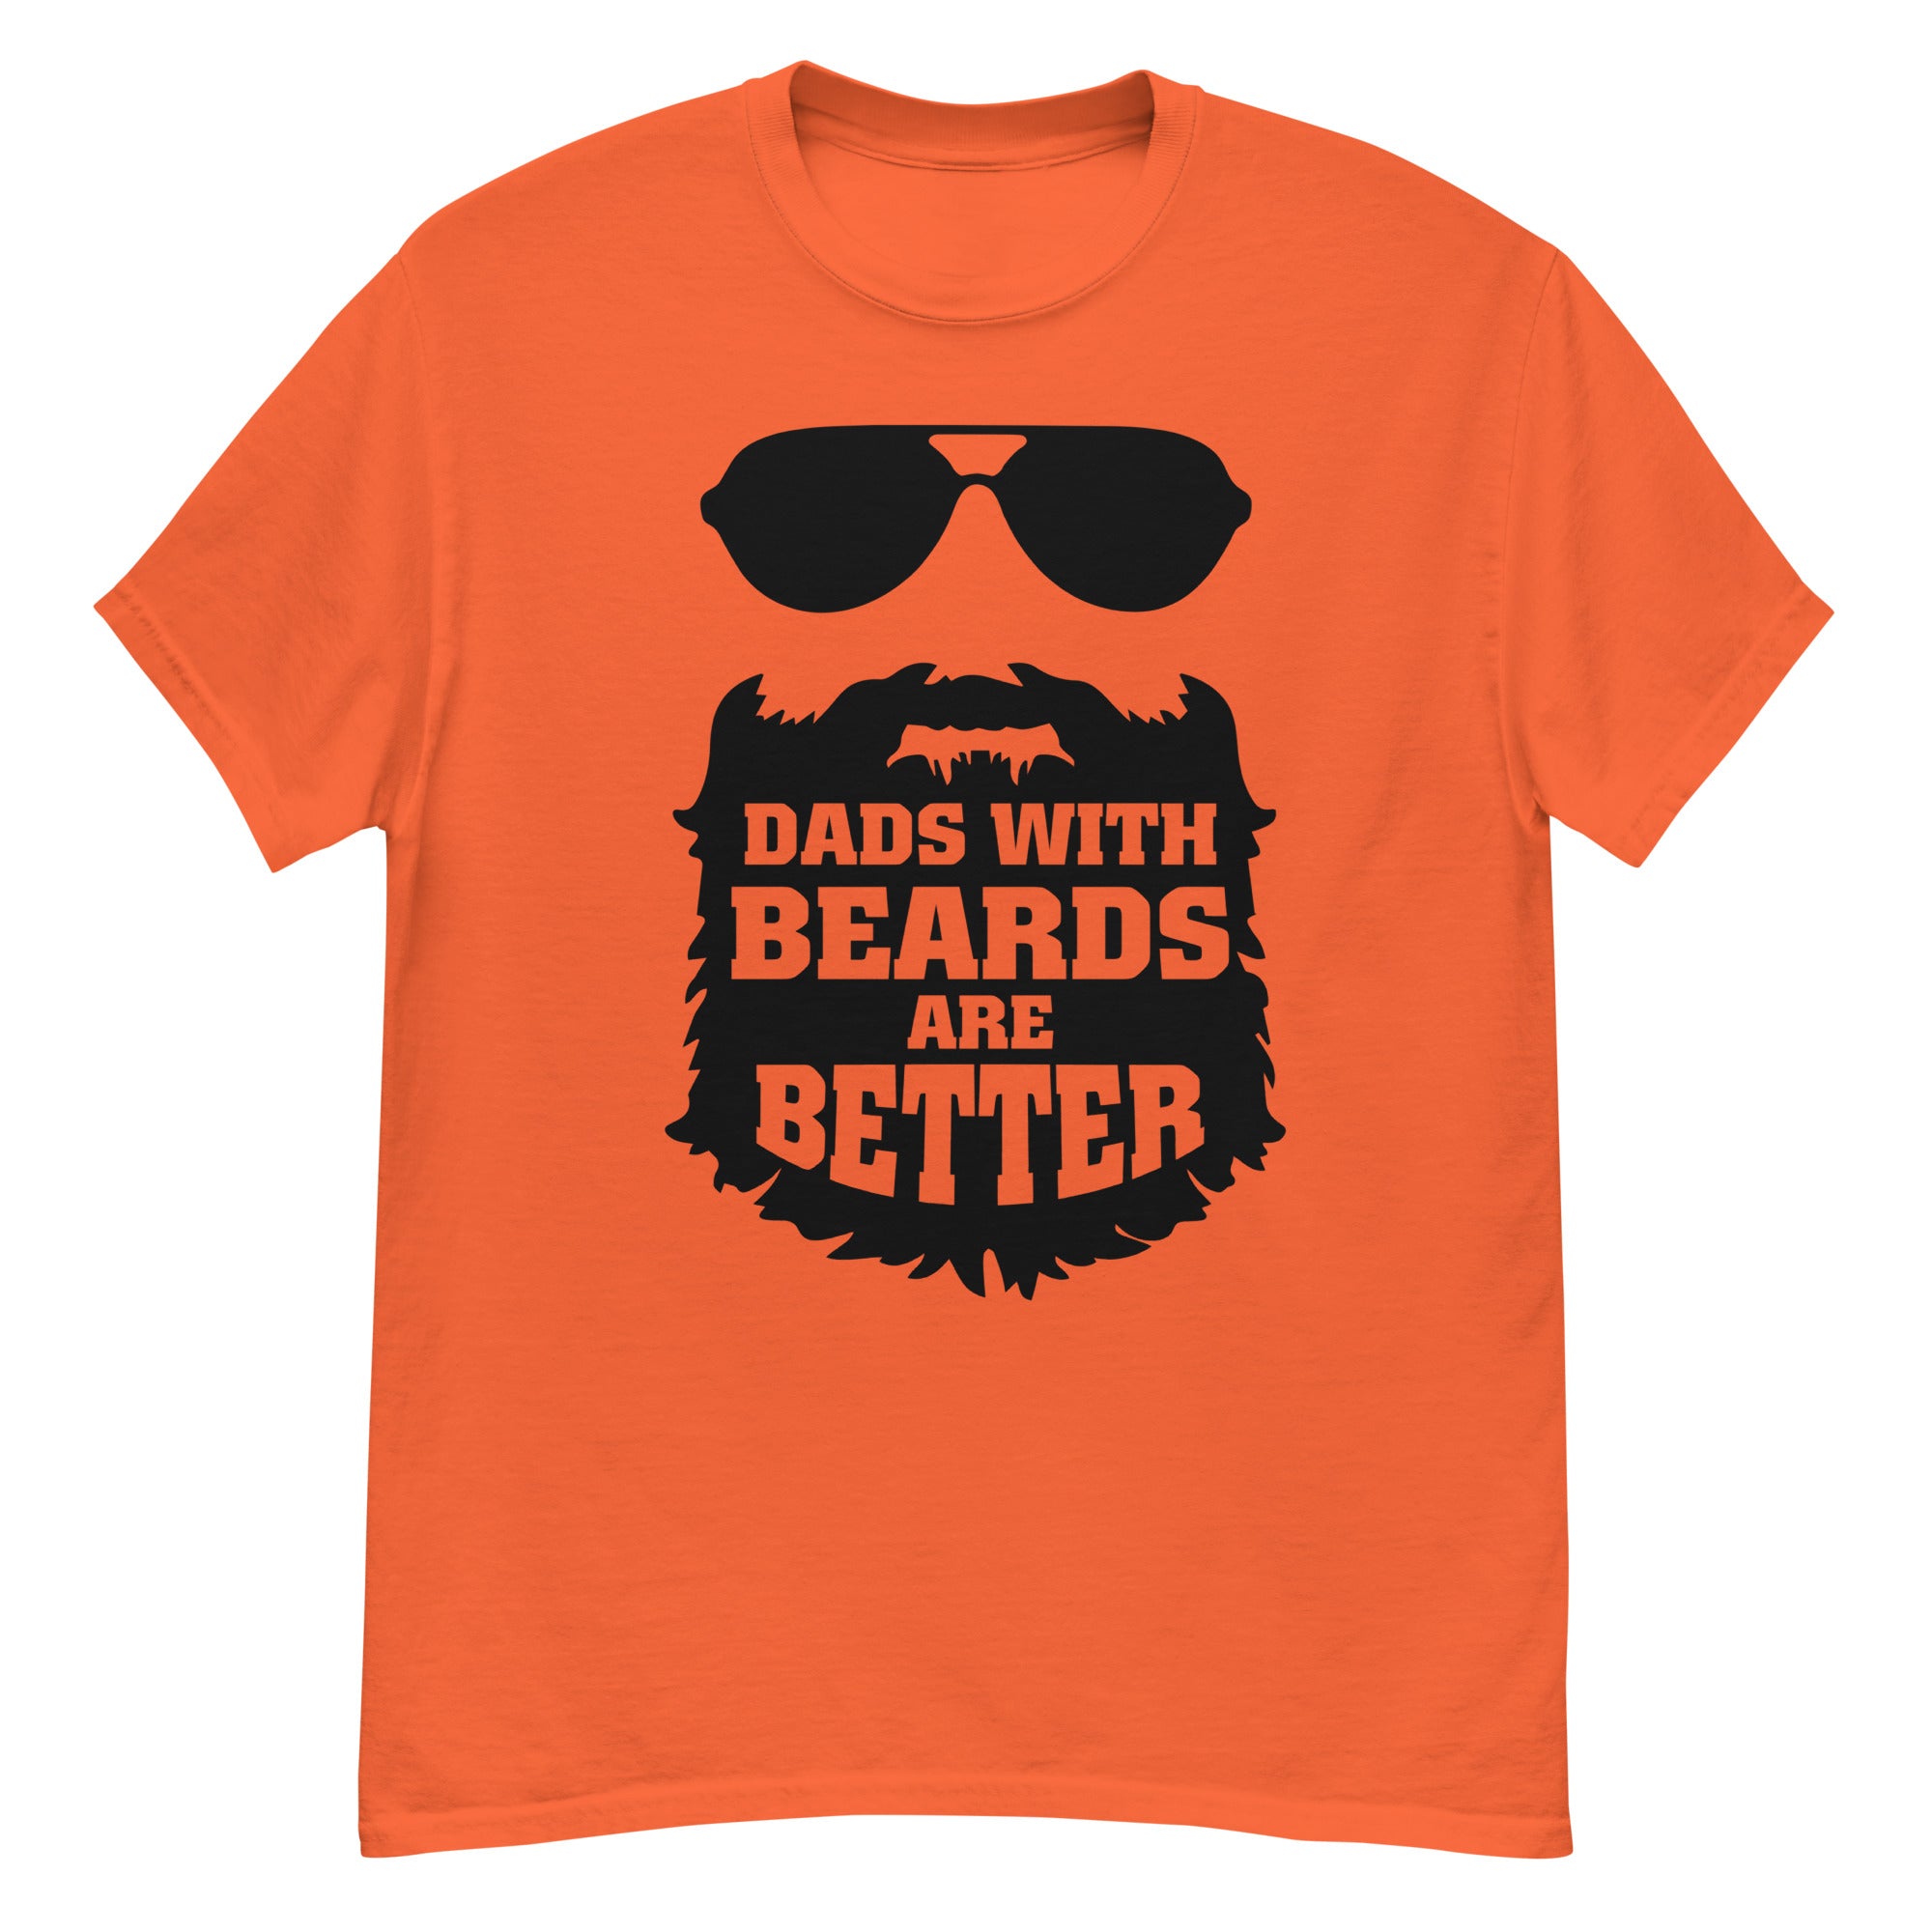 Dad's With Beards Are Better - Men's classic tee